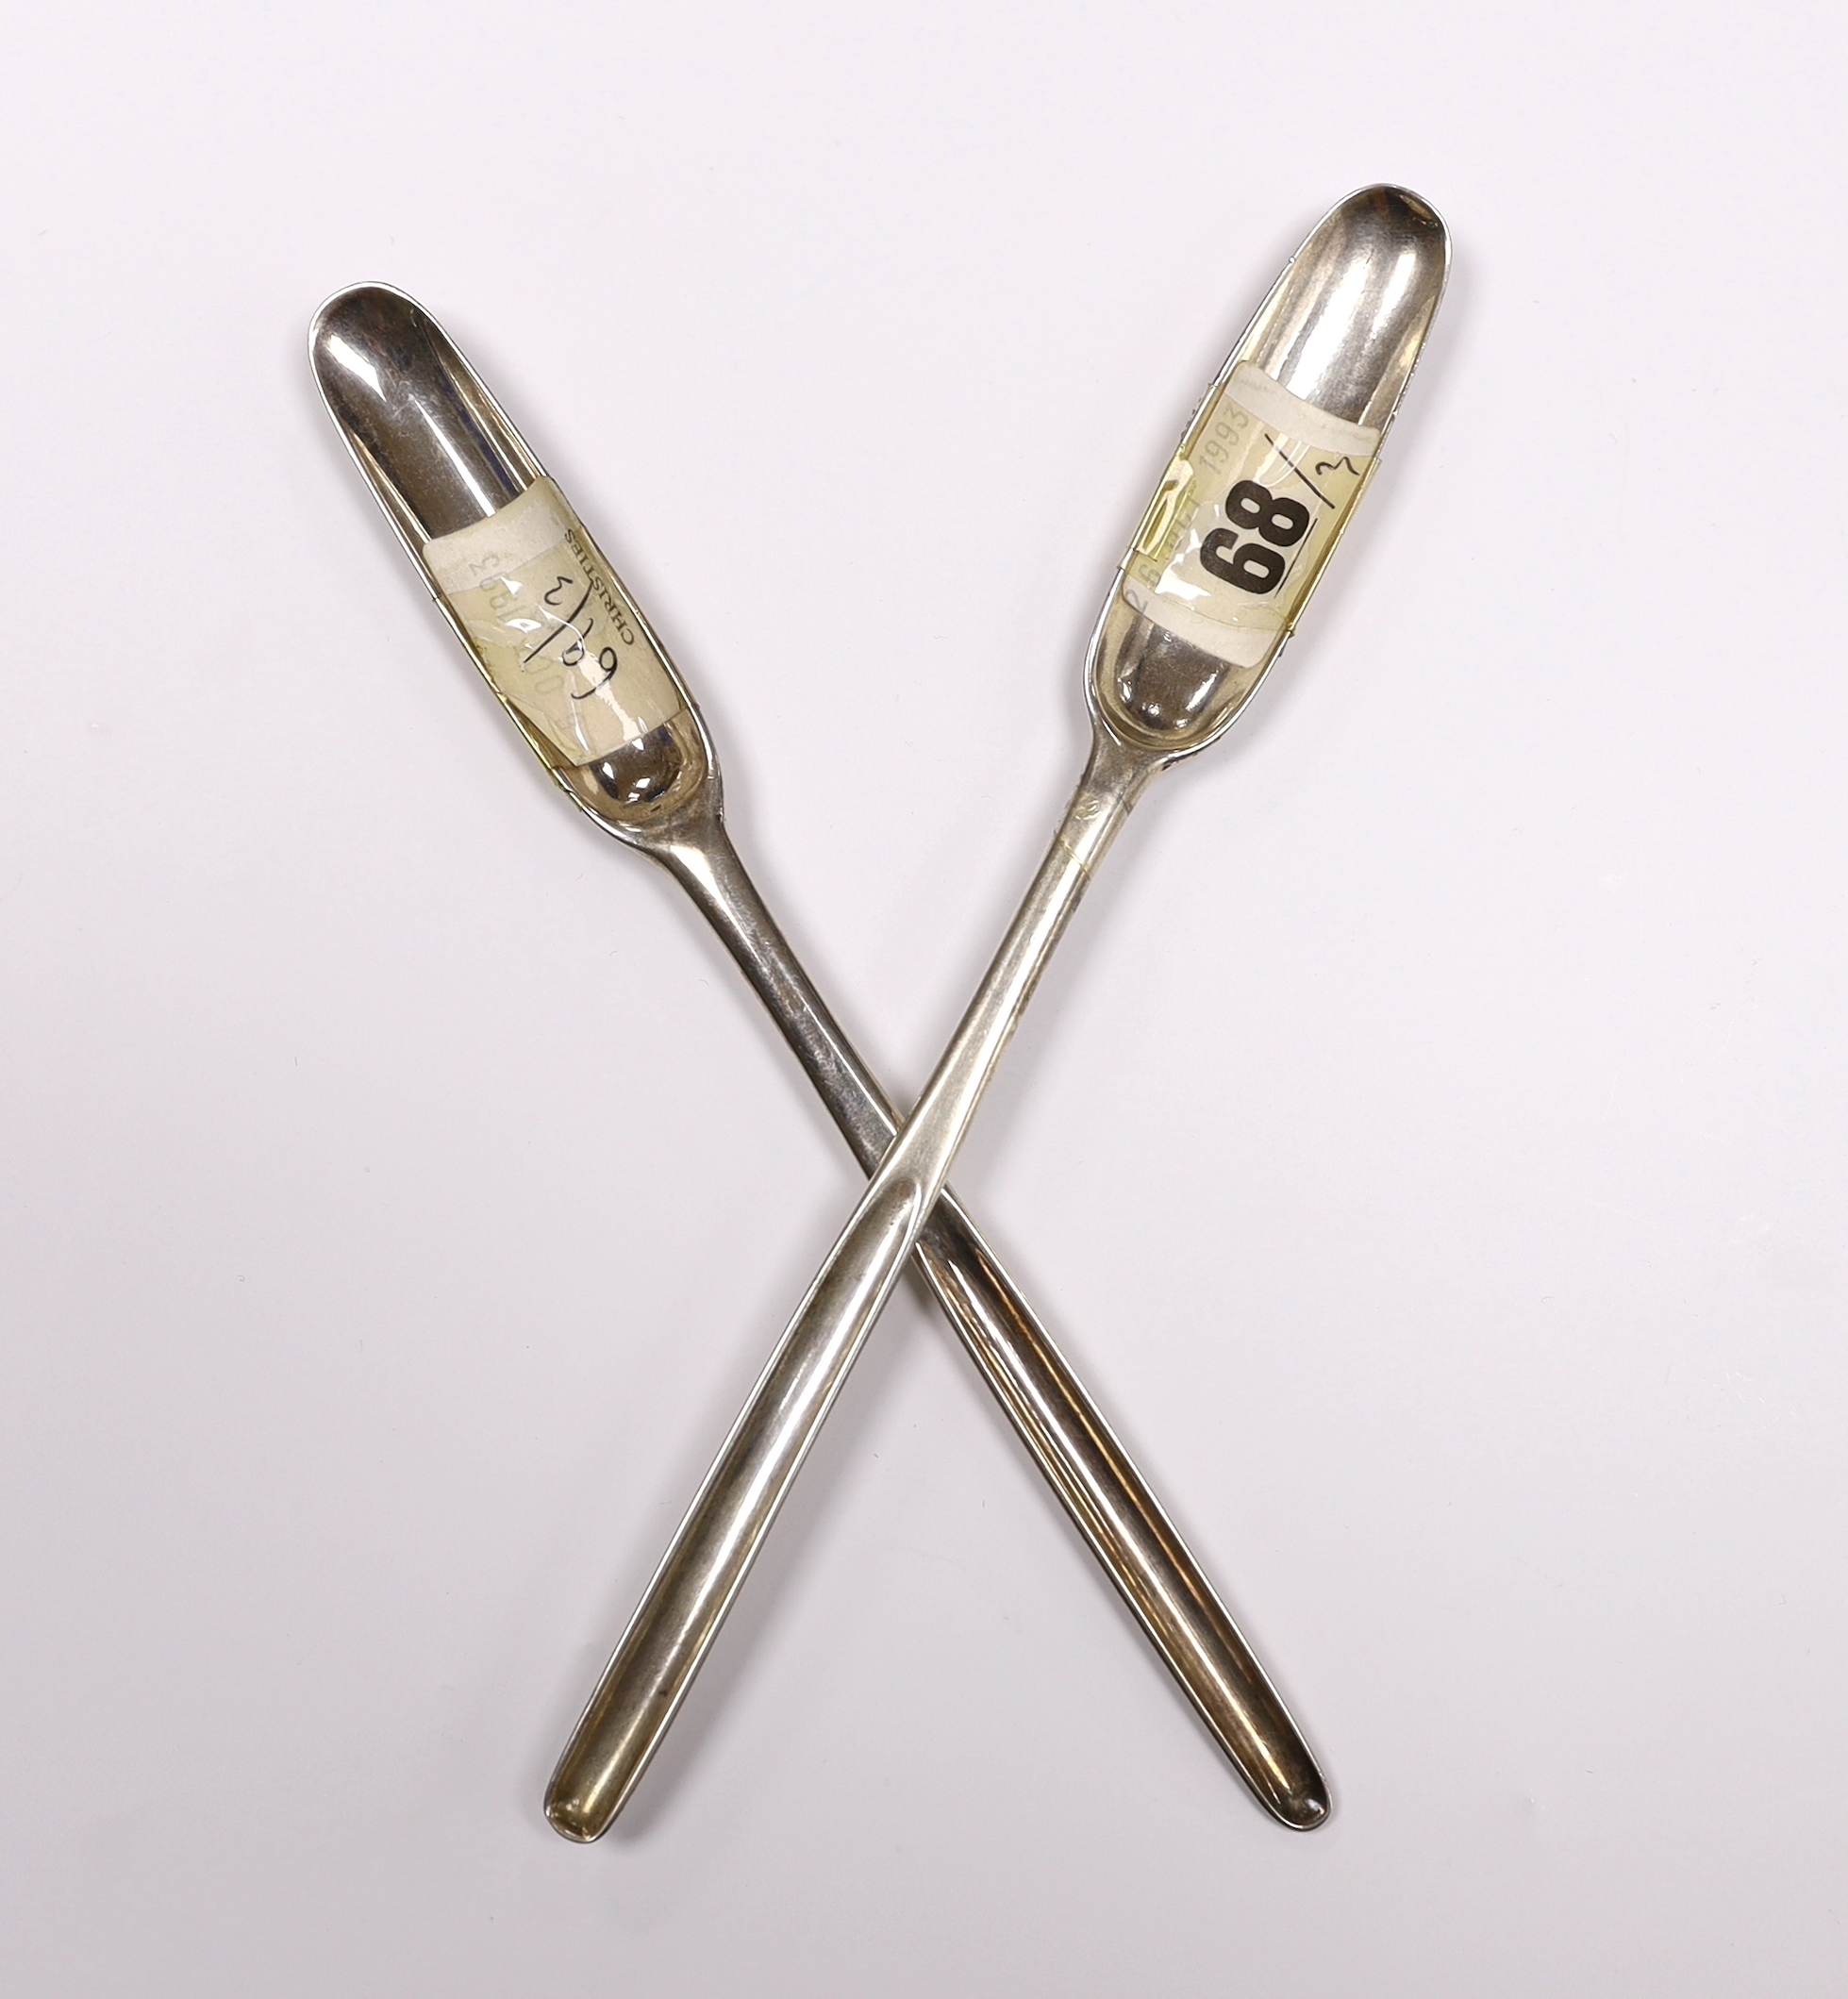 Two early 18th century silver marrow scoops, Henry Clarke I, London, circa 1720 and Andrew Archer, London, 1722, both approx. 21cm, 94 grams.